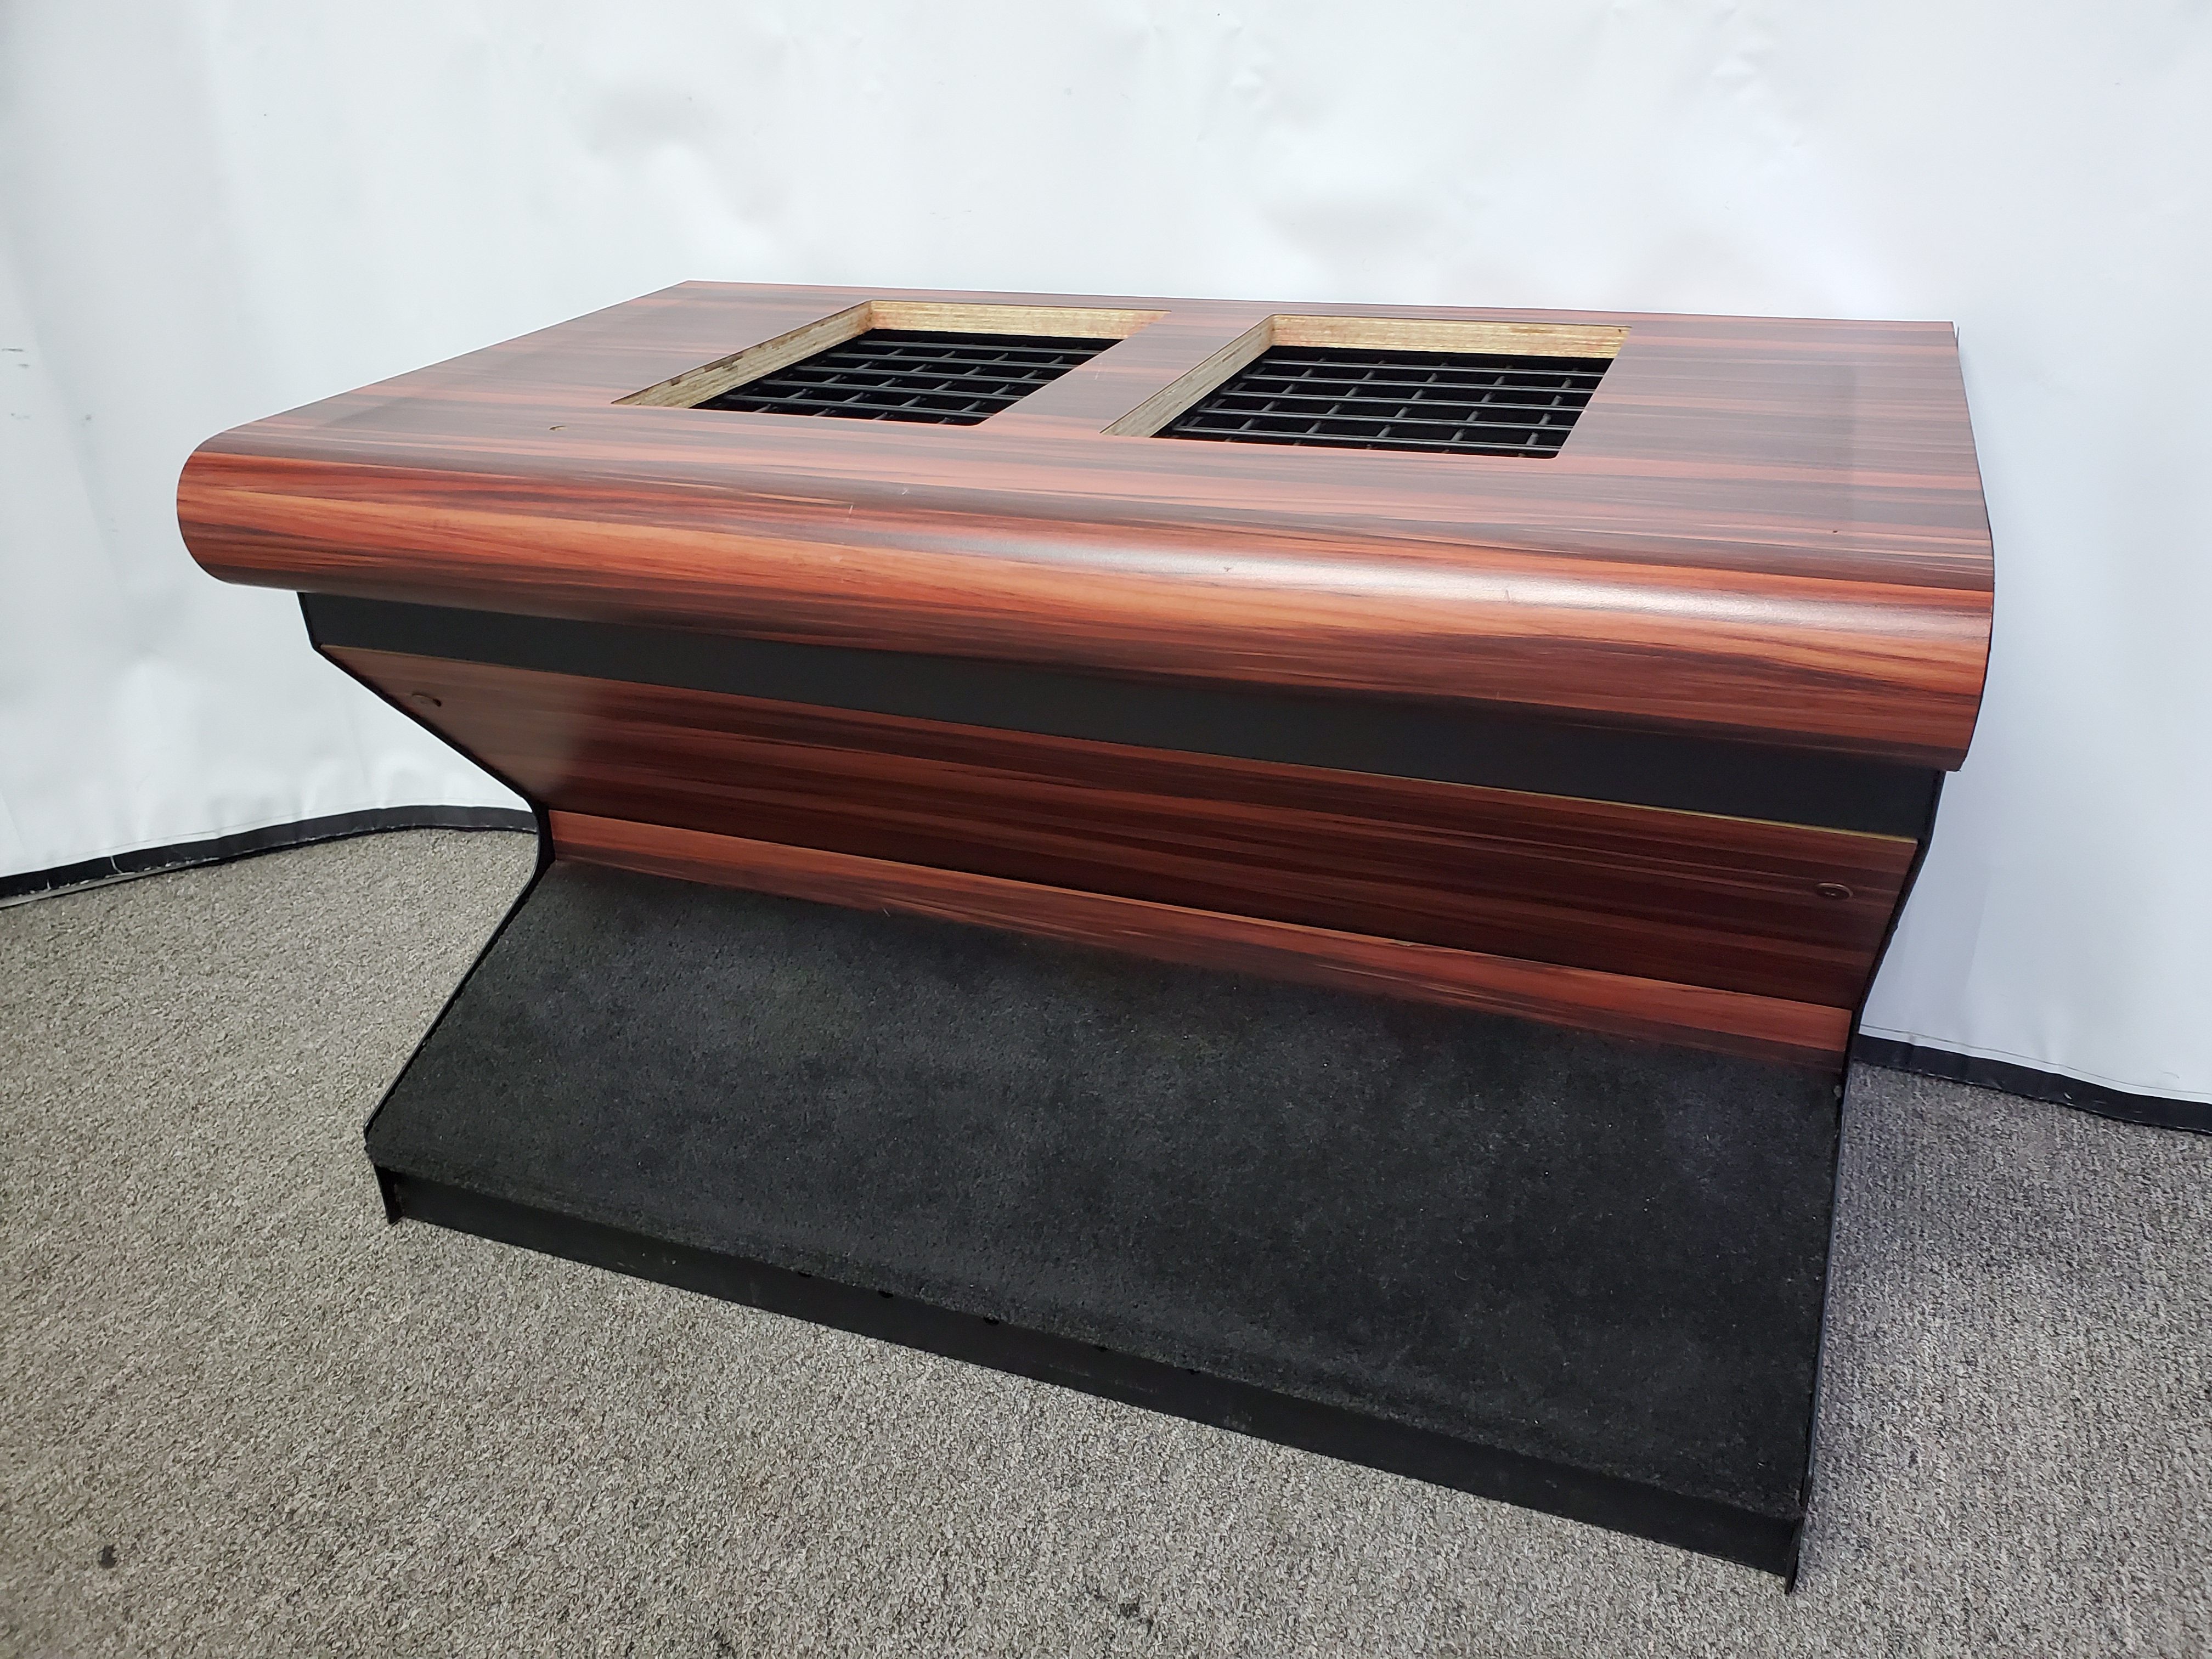 BULL NOSE SLOT MACHINE STAND - BASE WITH CARPETED FOOTREST & WOODGRAIN